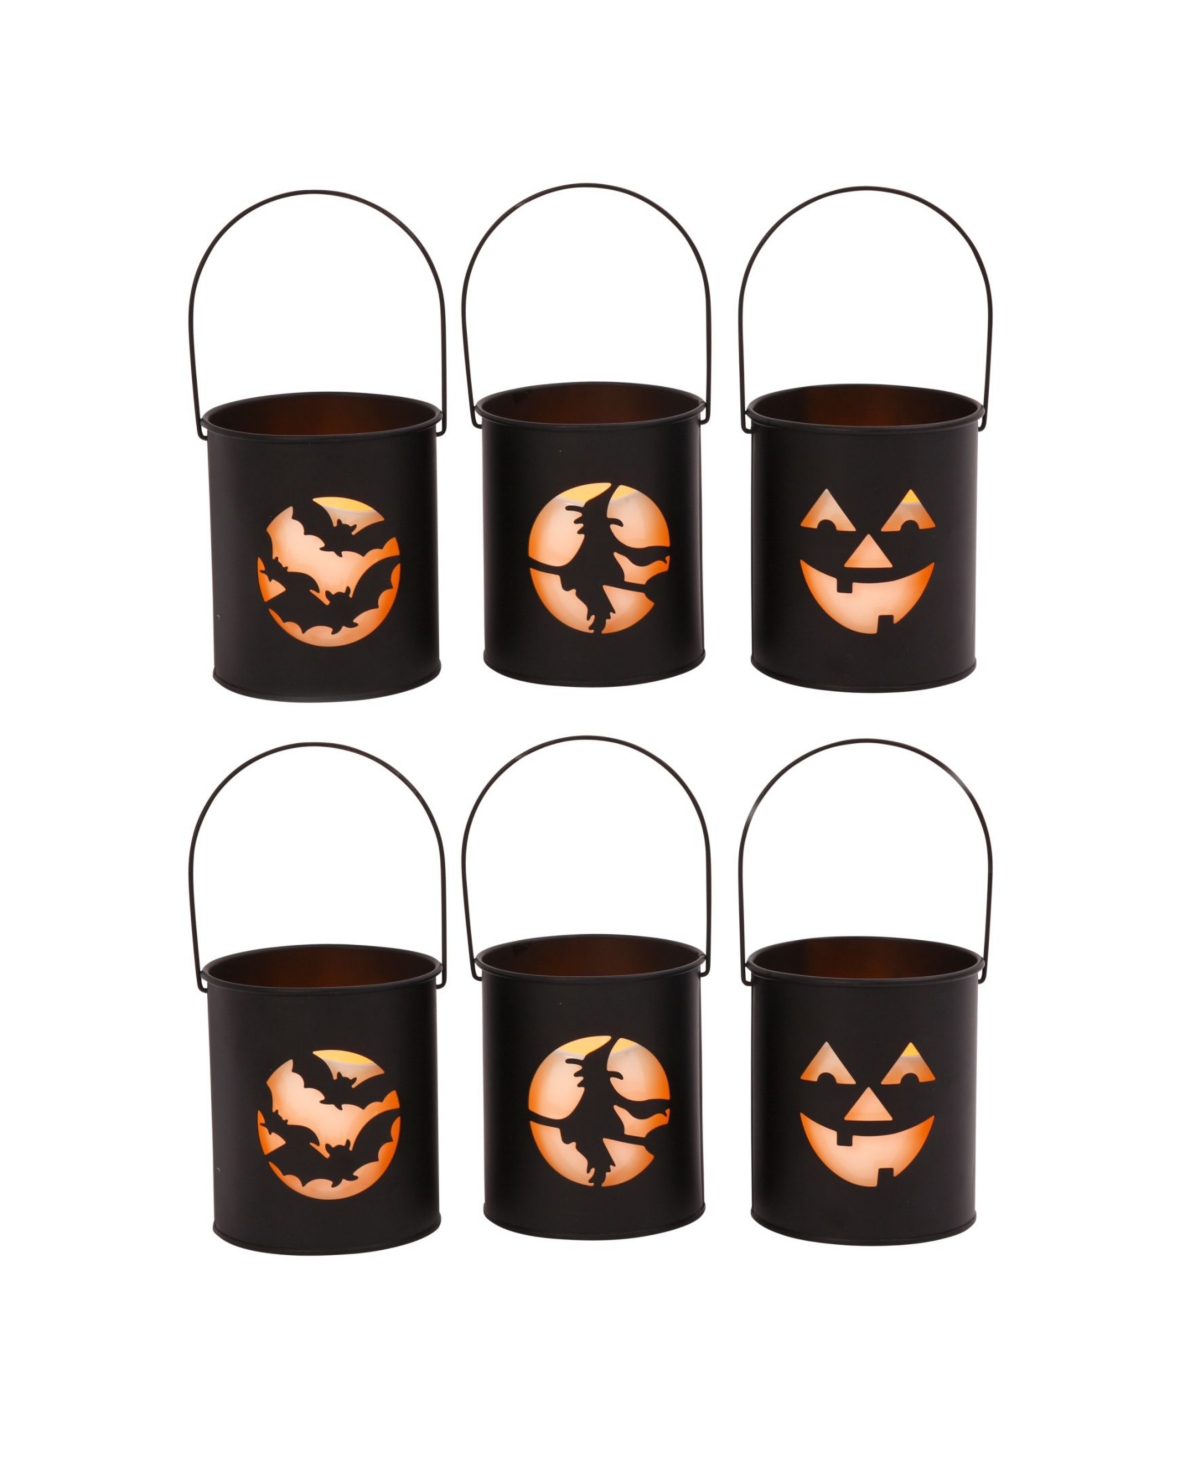 Battery Operated Lighted Halloween Cutout Luminary Each with 3" Candle Set, 6 Pieces - Black